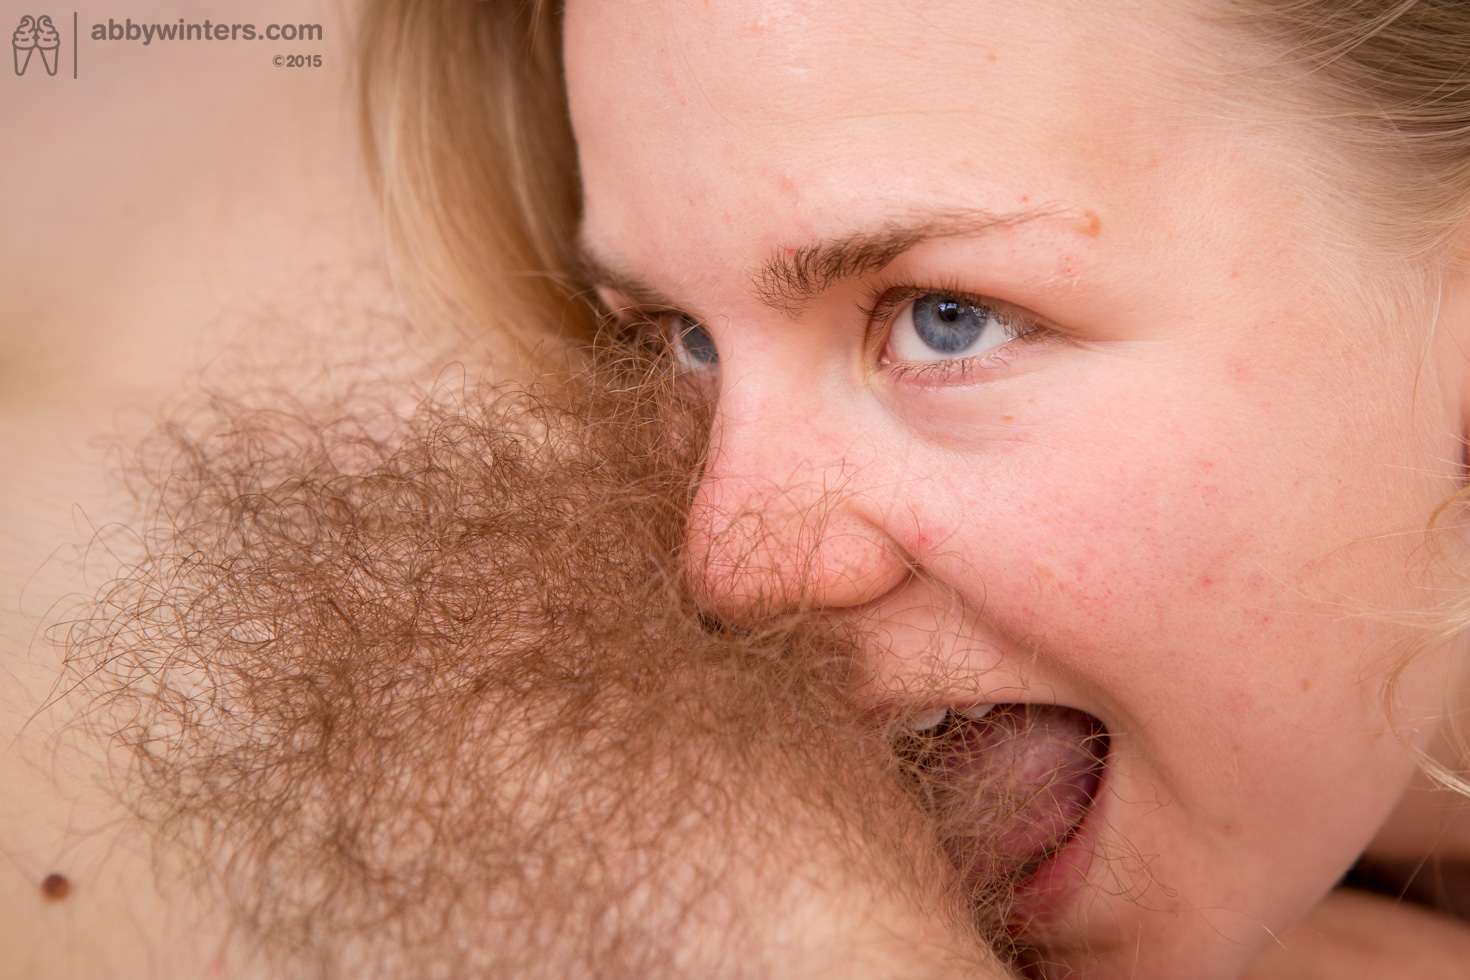 Hairy Amateur Fisting - Fisting hairy pussy | The Hairy Lady Blog